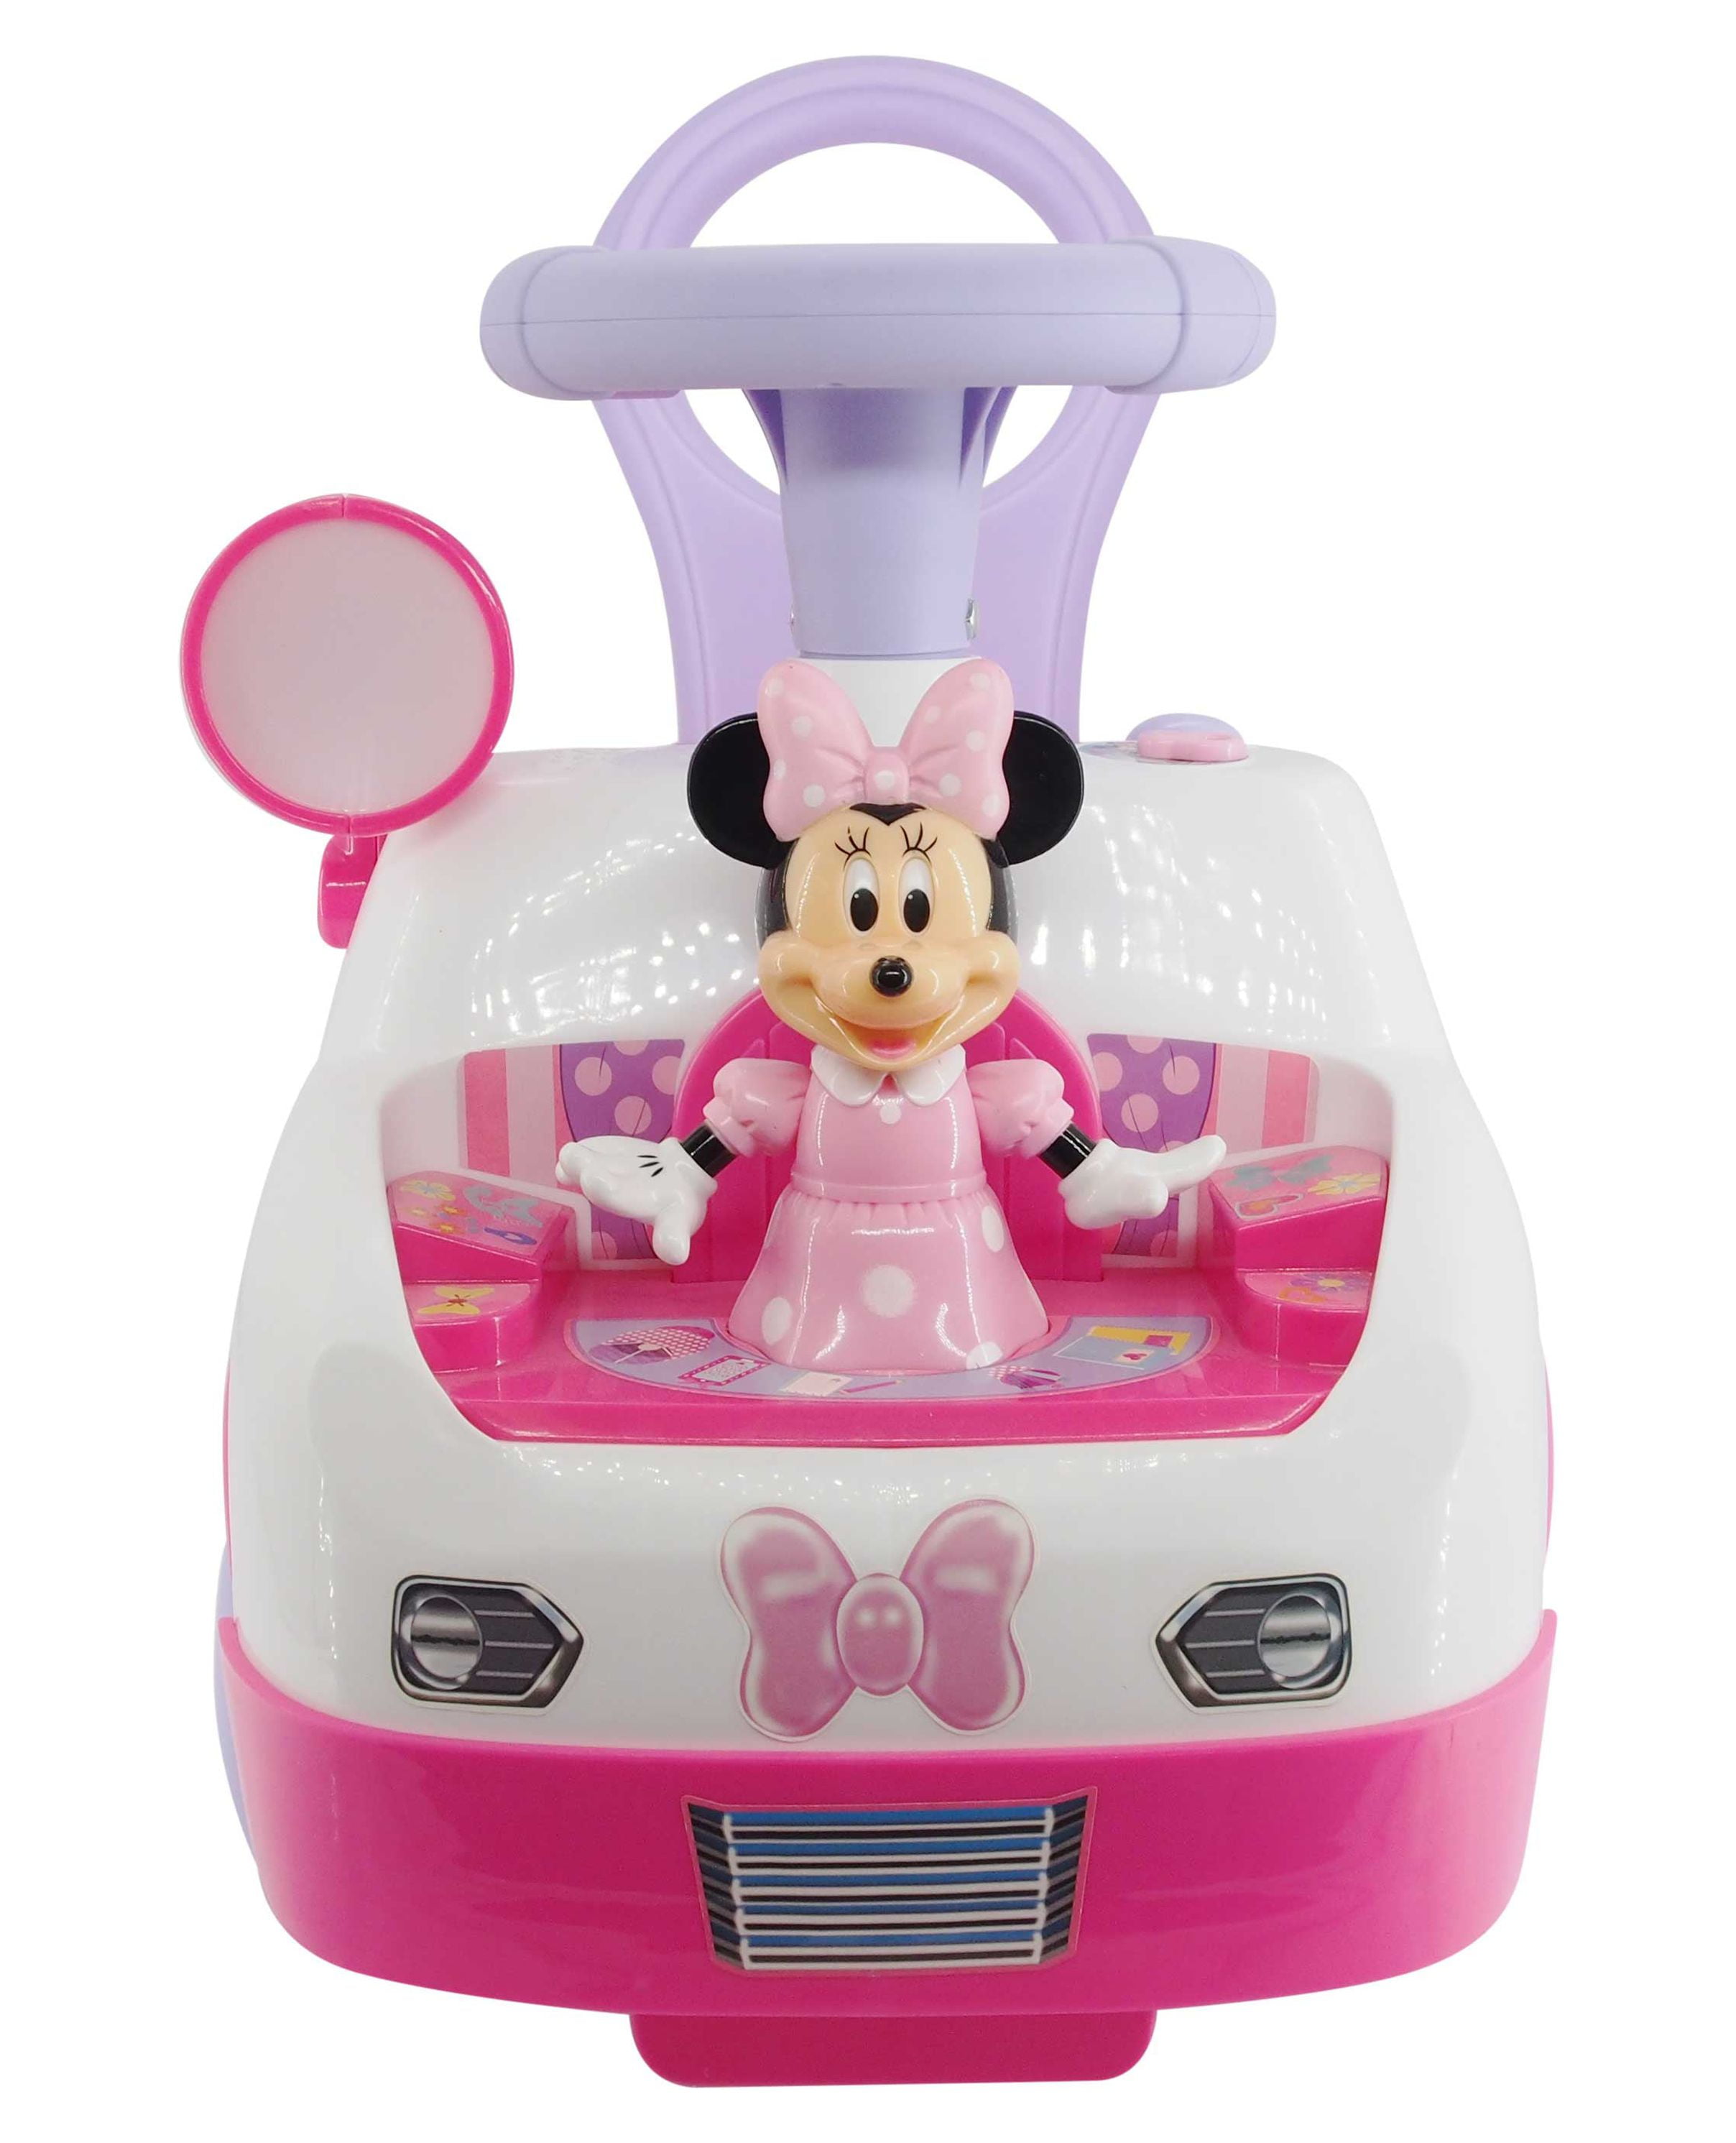 Activity Sounds Car Ride-On Interactive Dancing Kiddieland Mouse with Minnie